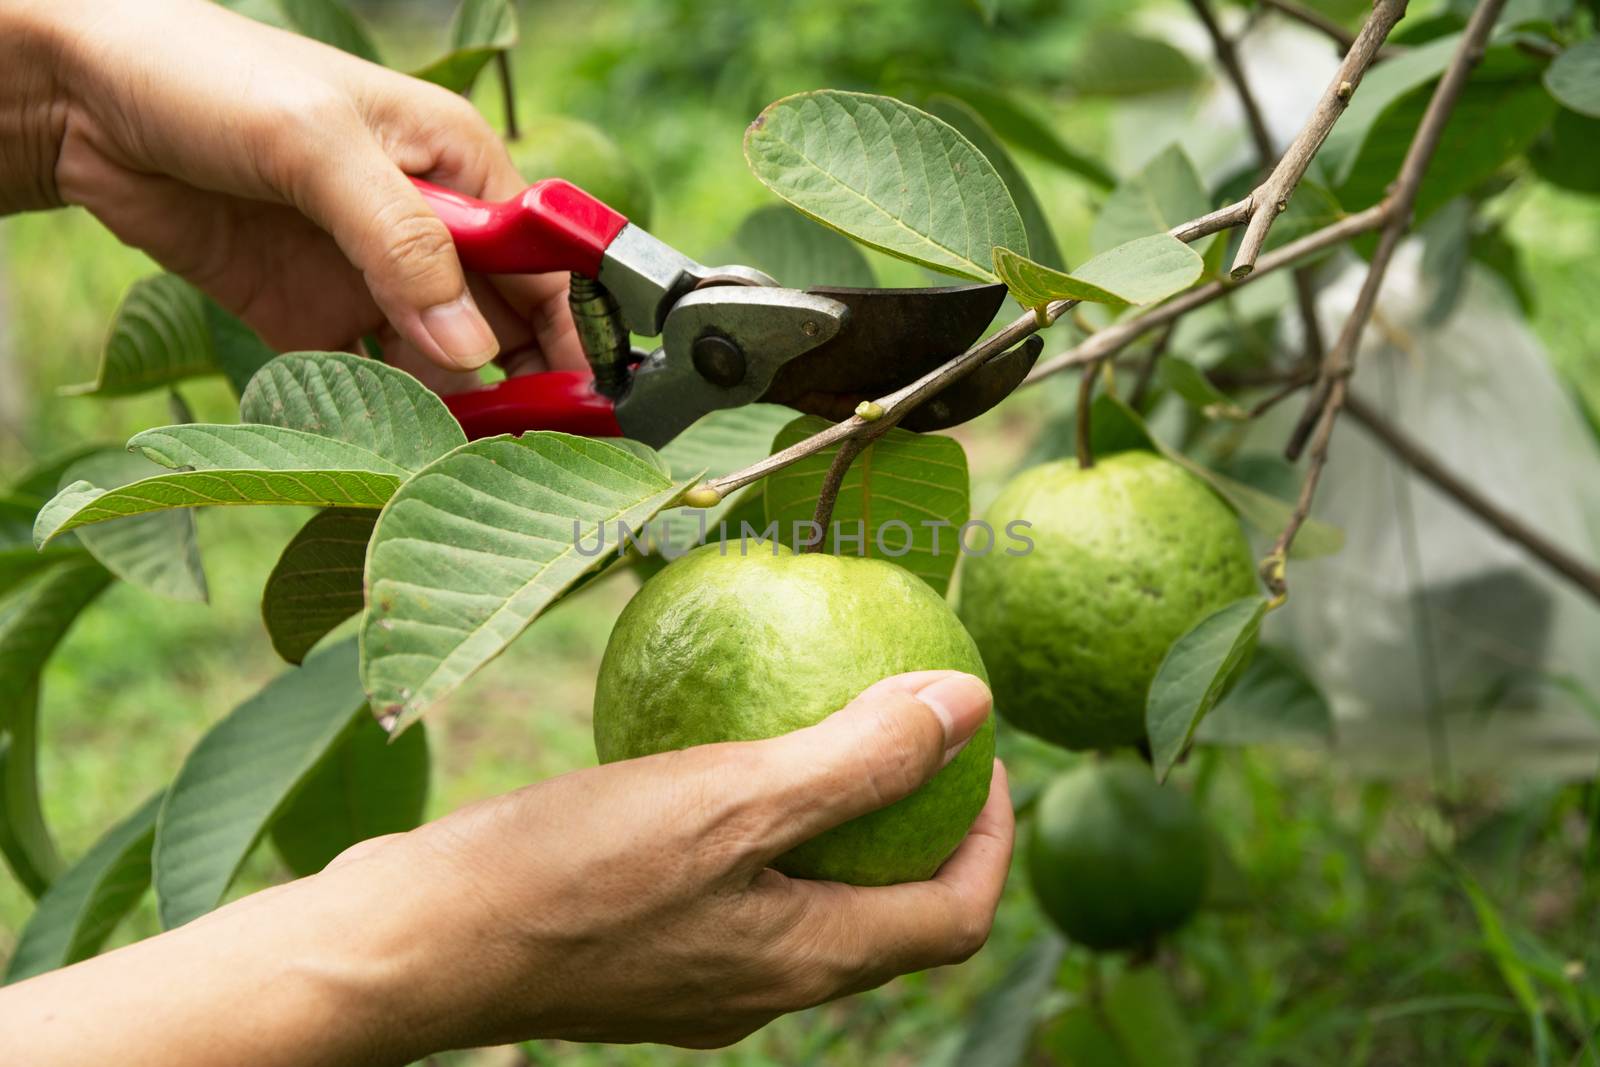 gardener pruning guava trees with pruning shears on nature background.